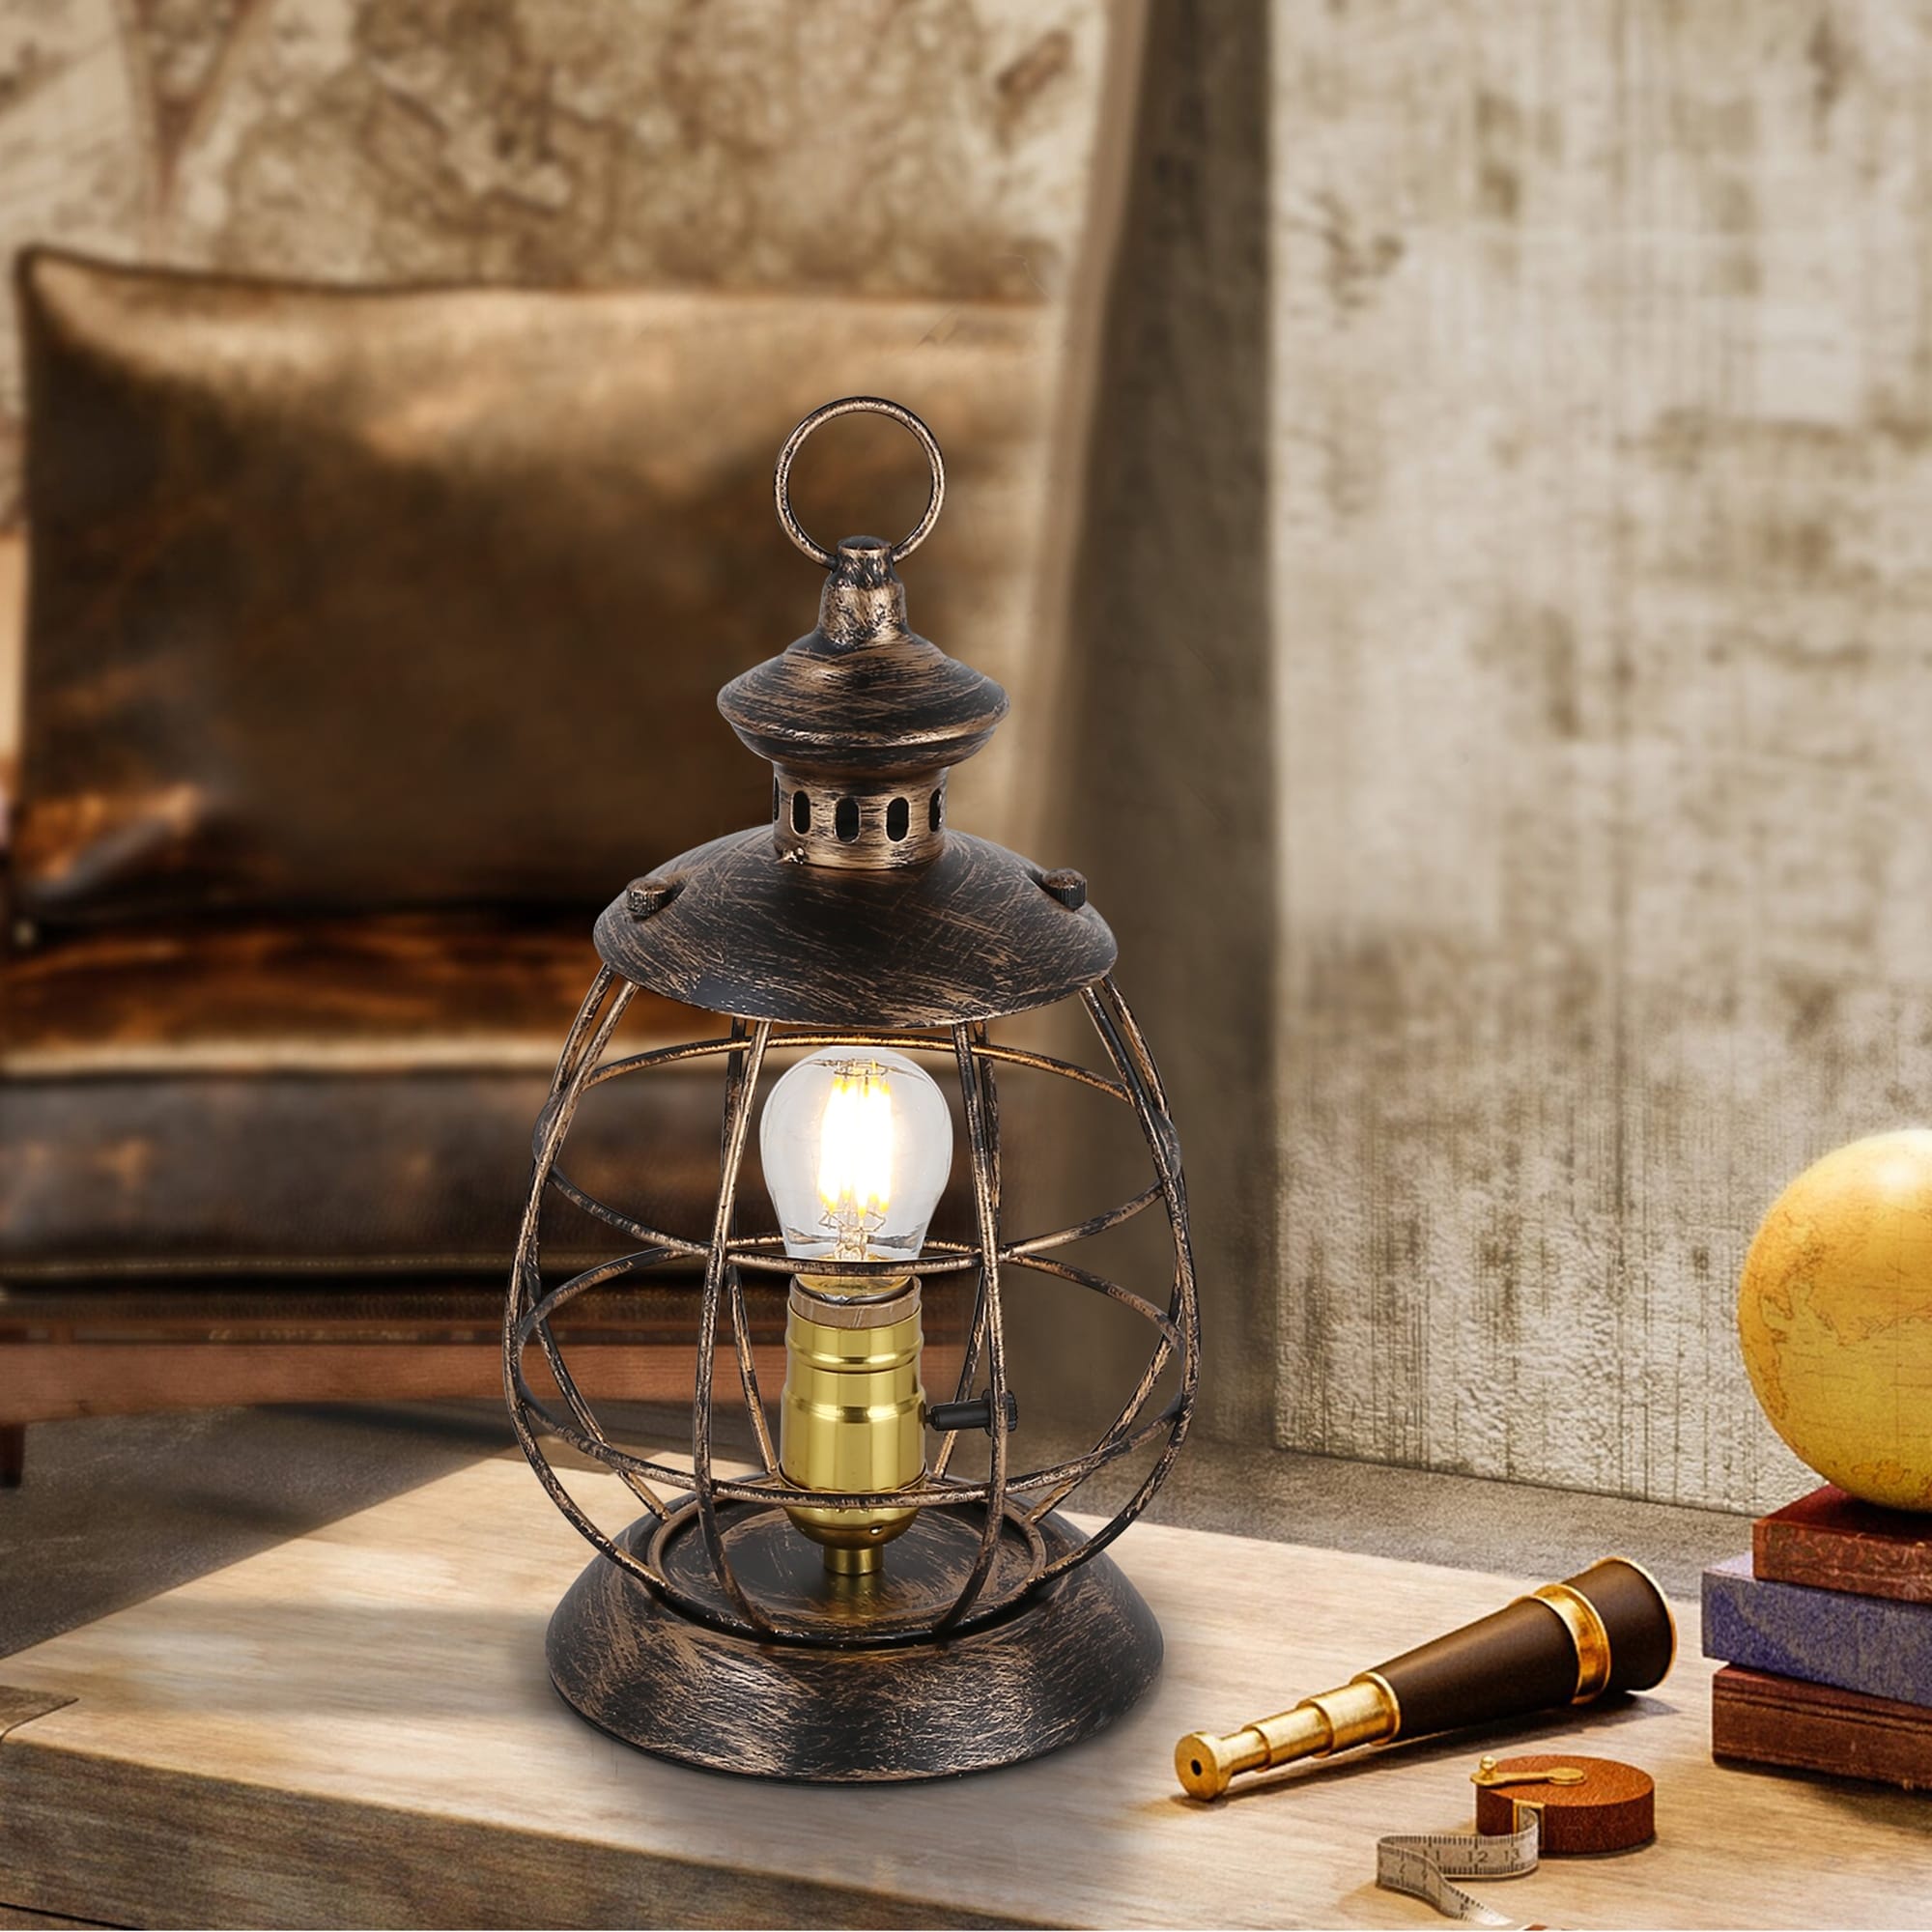 https://ak1.ostkcdn.com/images/products/is/images/direct/46e7d7dc4fbd546c52194efd2abe5a7e202b0795/Antique-Industrial-Modern-Electric-Lantern-Table-Lamp-for-Bedroom-Bedside%2C-Metal-Cage-Shade-Reading-Desk-Lamp-for-Living-Room.jpg